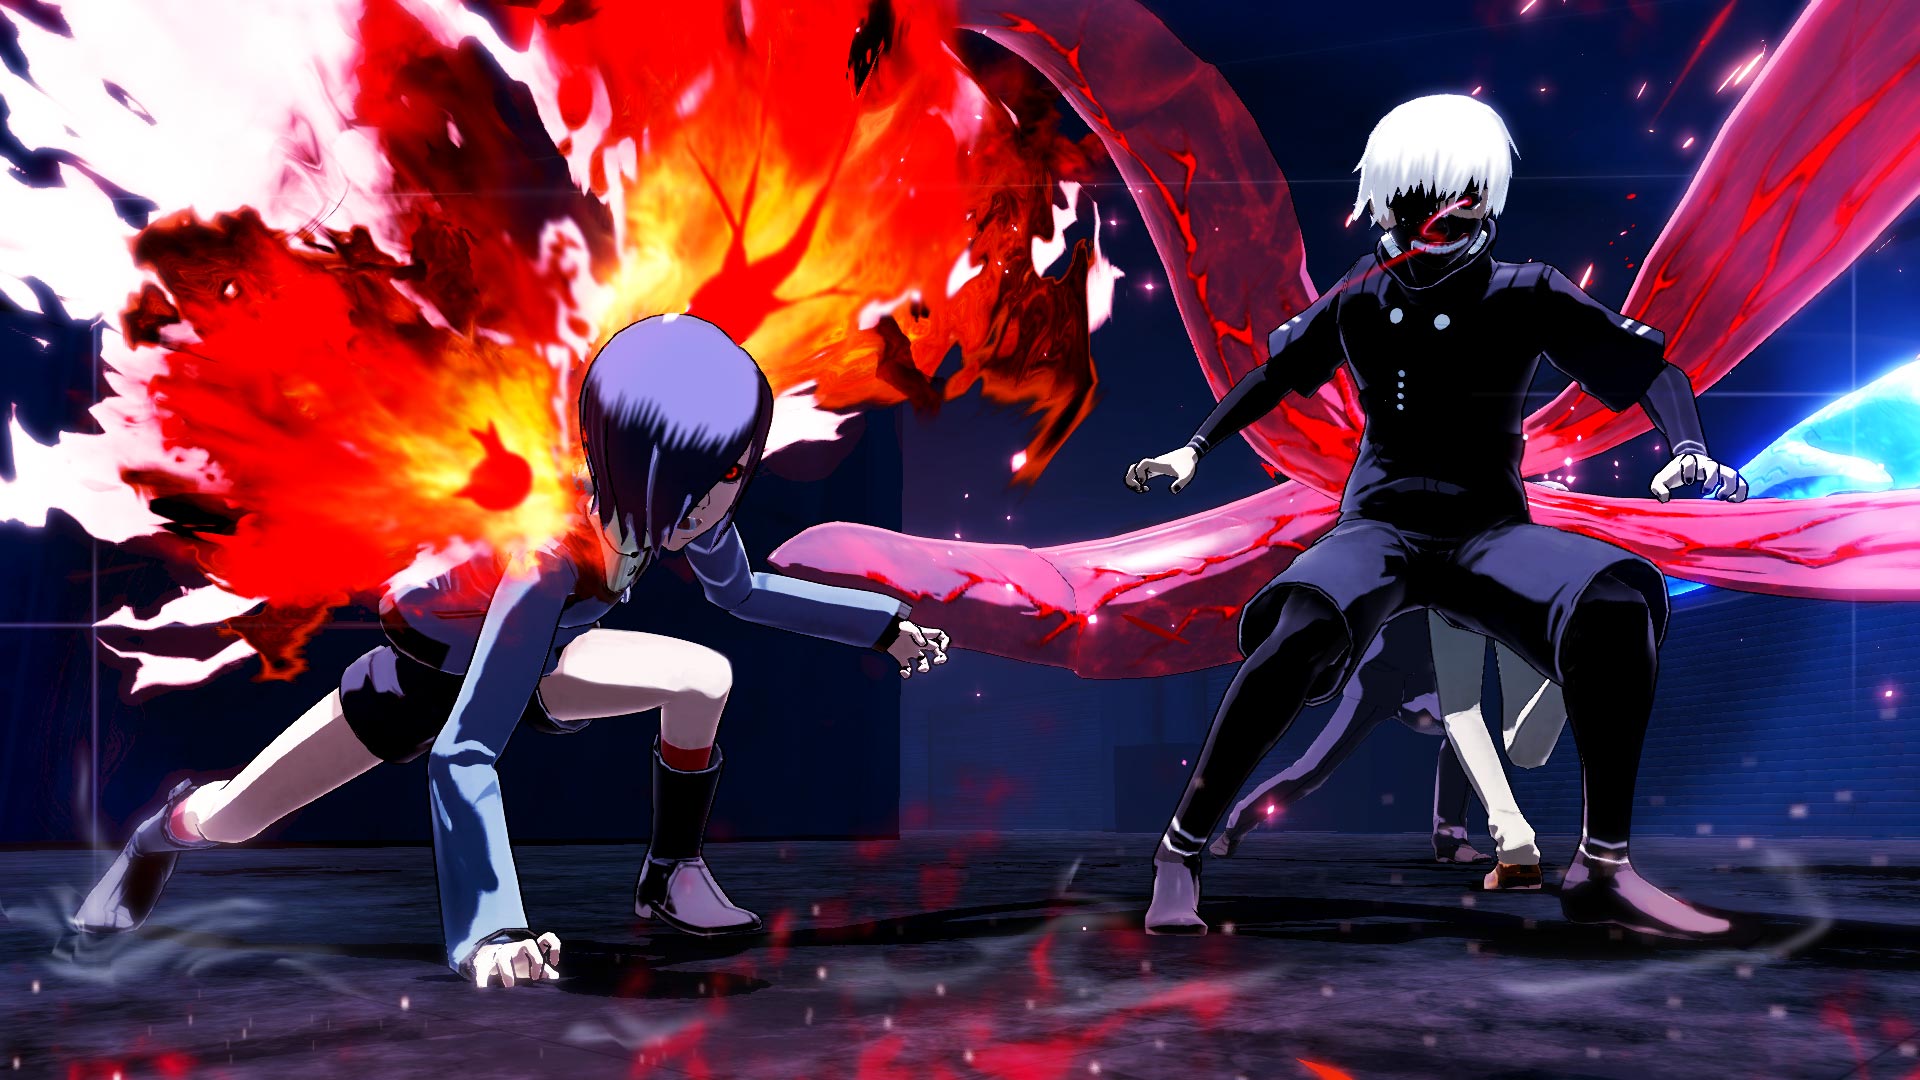 TOKYO GHOUL:re [CALL to EXIST] [Online Game Code] 